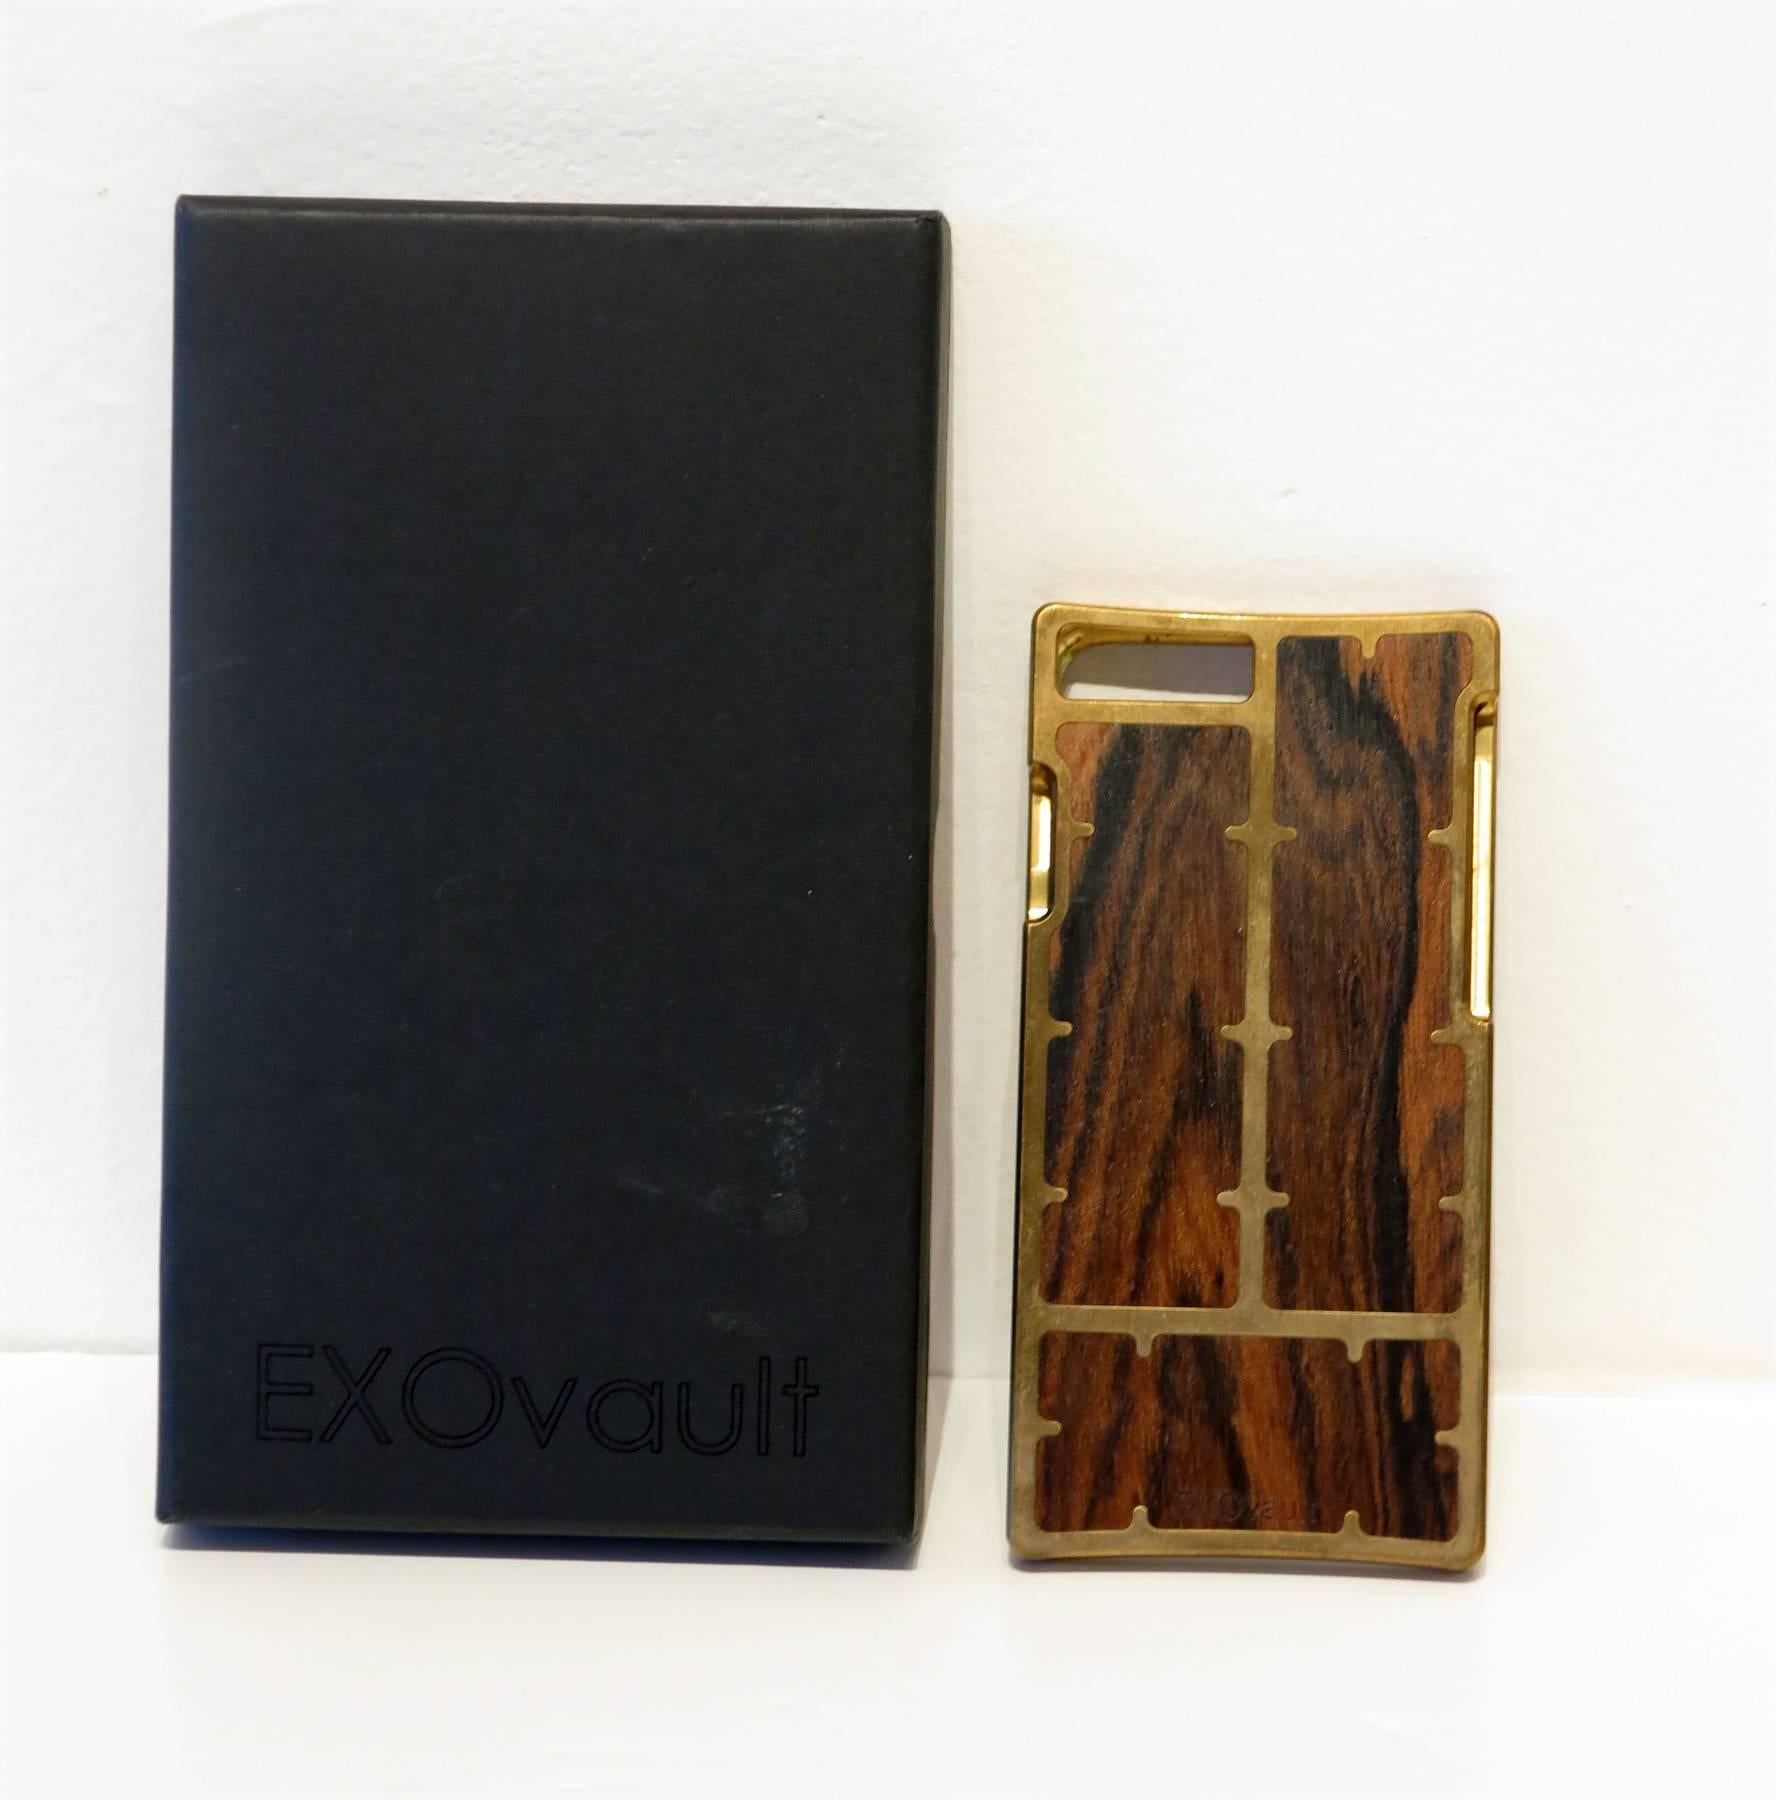 EXOvault Brass Louro Preto Iphone 6 case wood & brass new in box...The EXO23, with its hinged clamshell design and magnetic closure, provides distinct and elegant protection for your iPhone...
Measurements for iphone6: 
x 5.44 x 2.64 x 0.28 inches